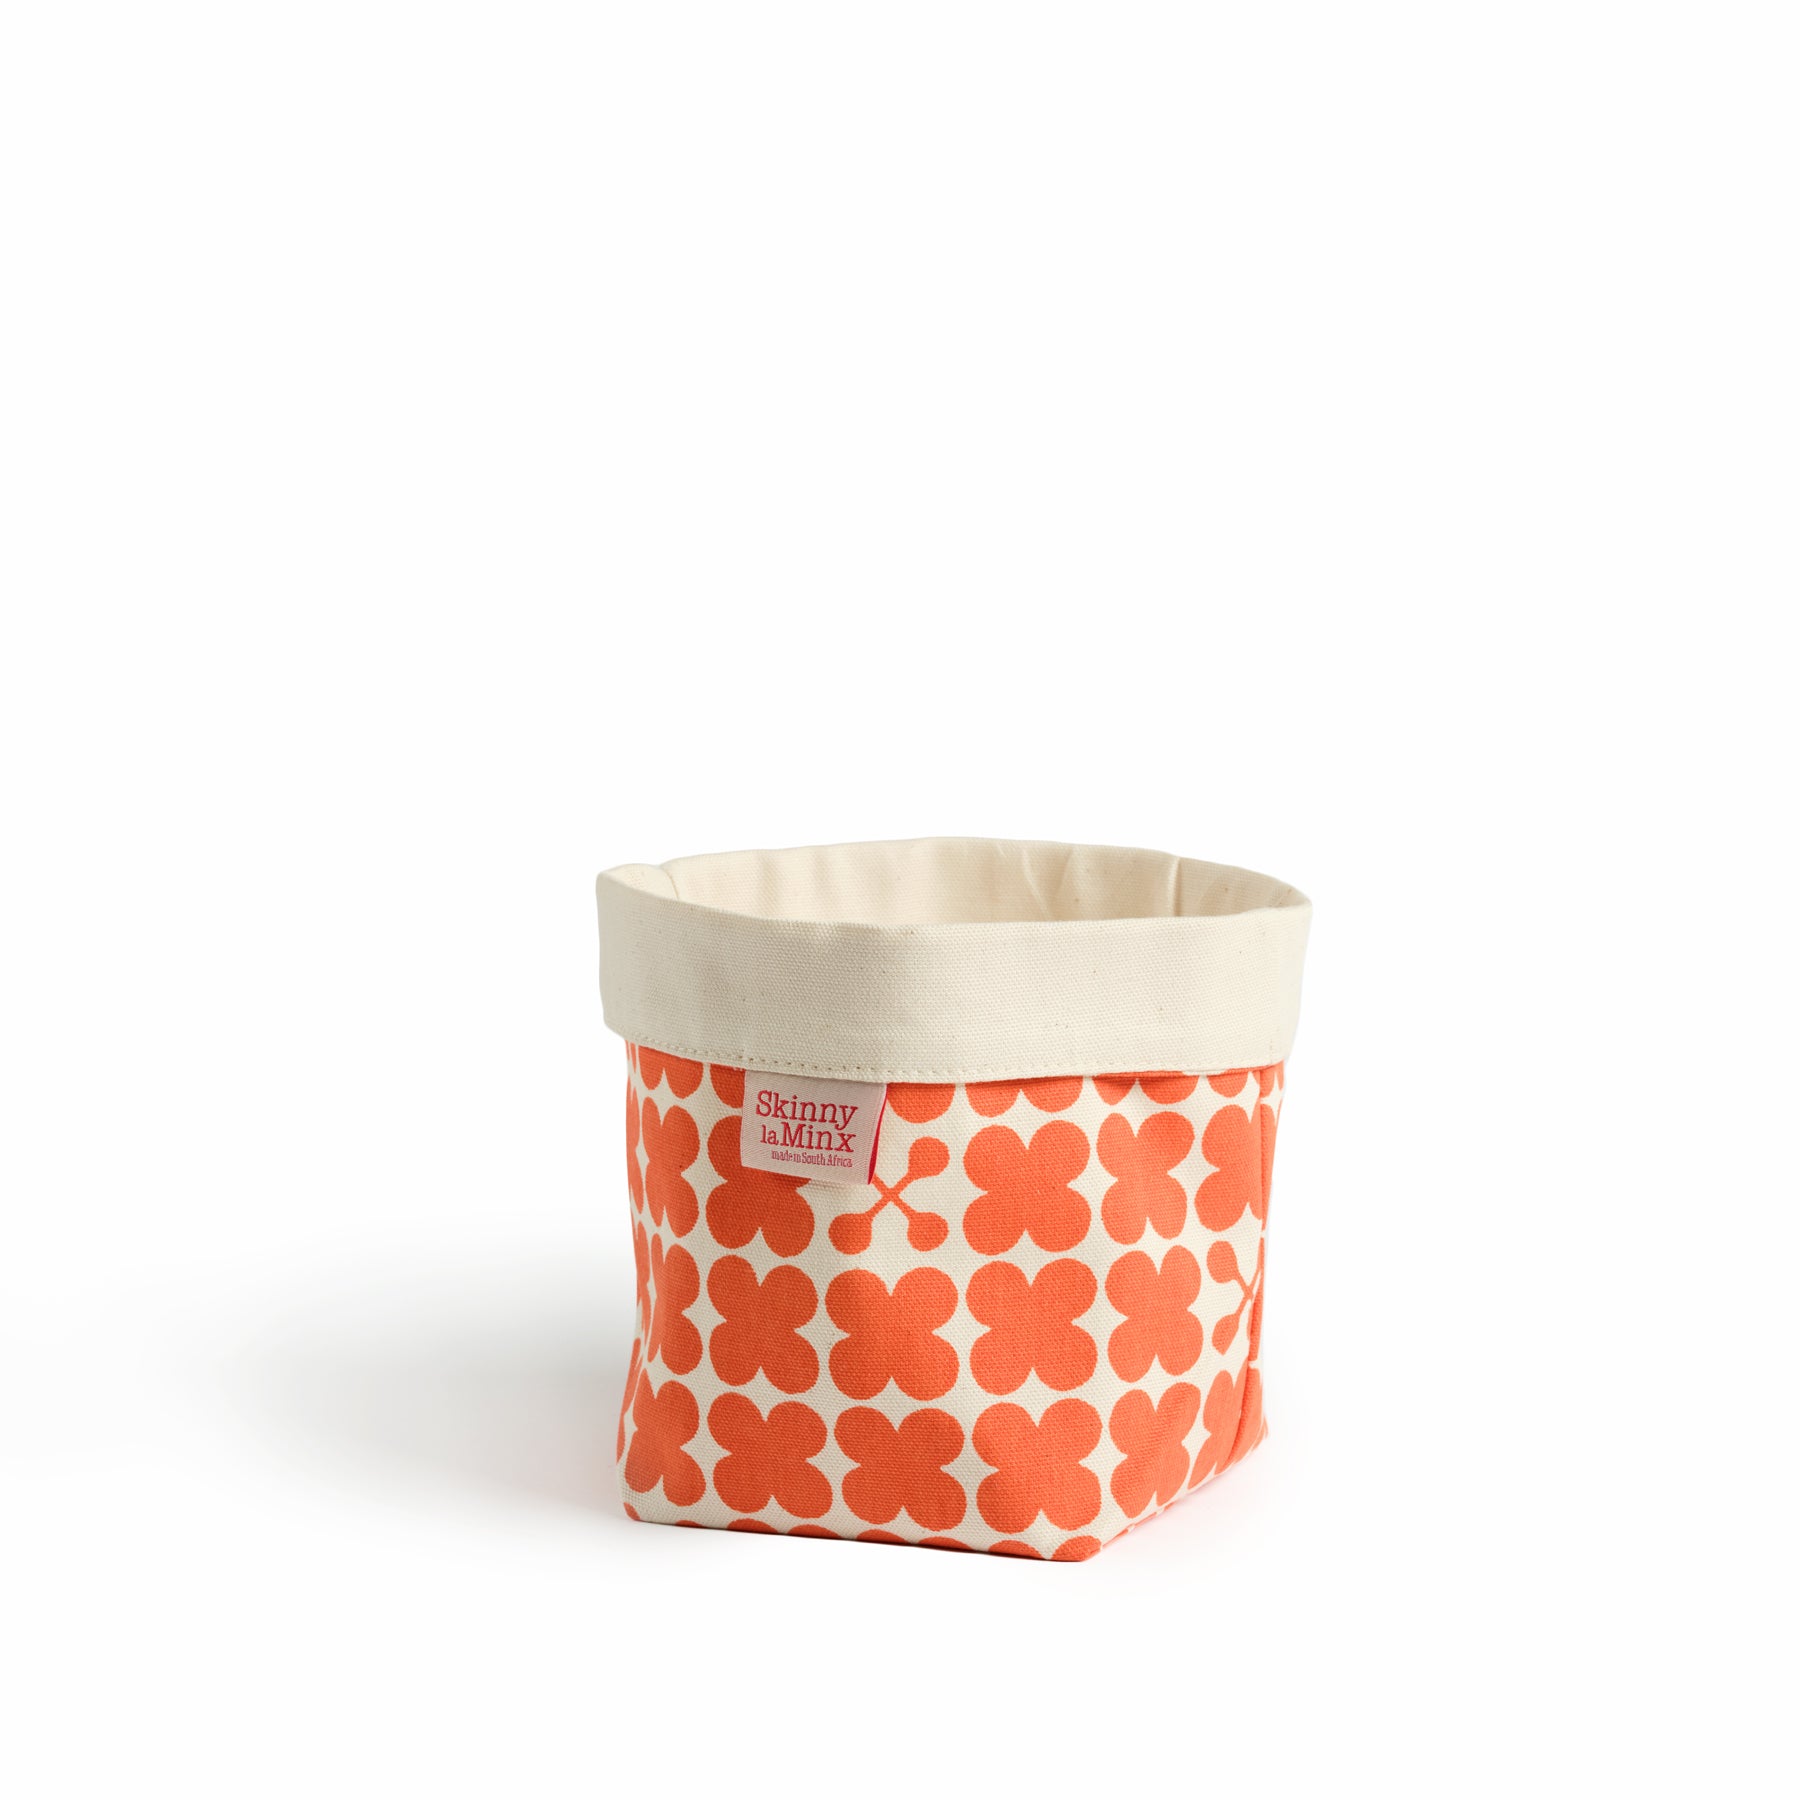 Scandi Candy Soft Bucket in Persimmon Zoom Image 1